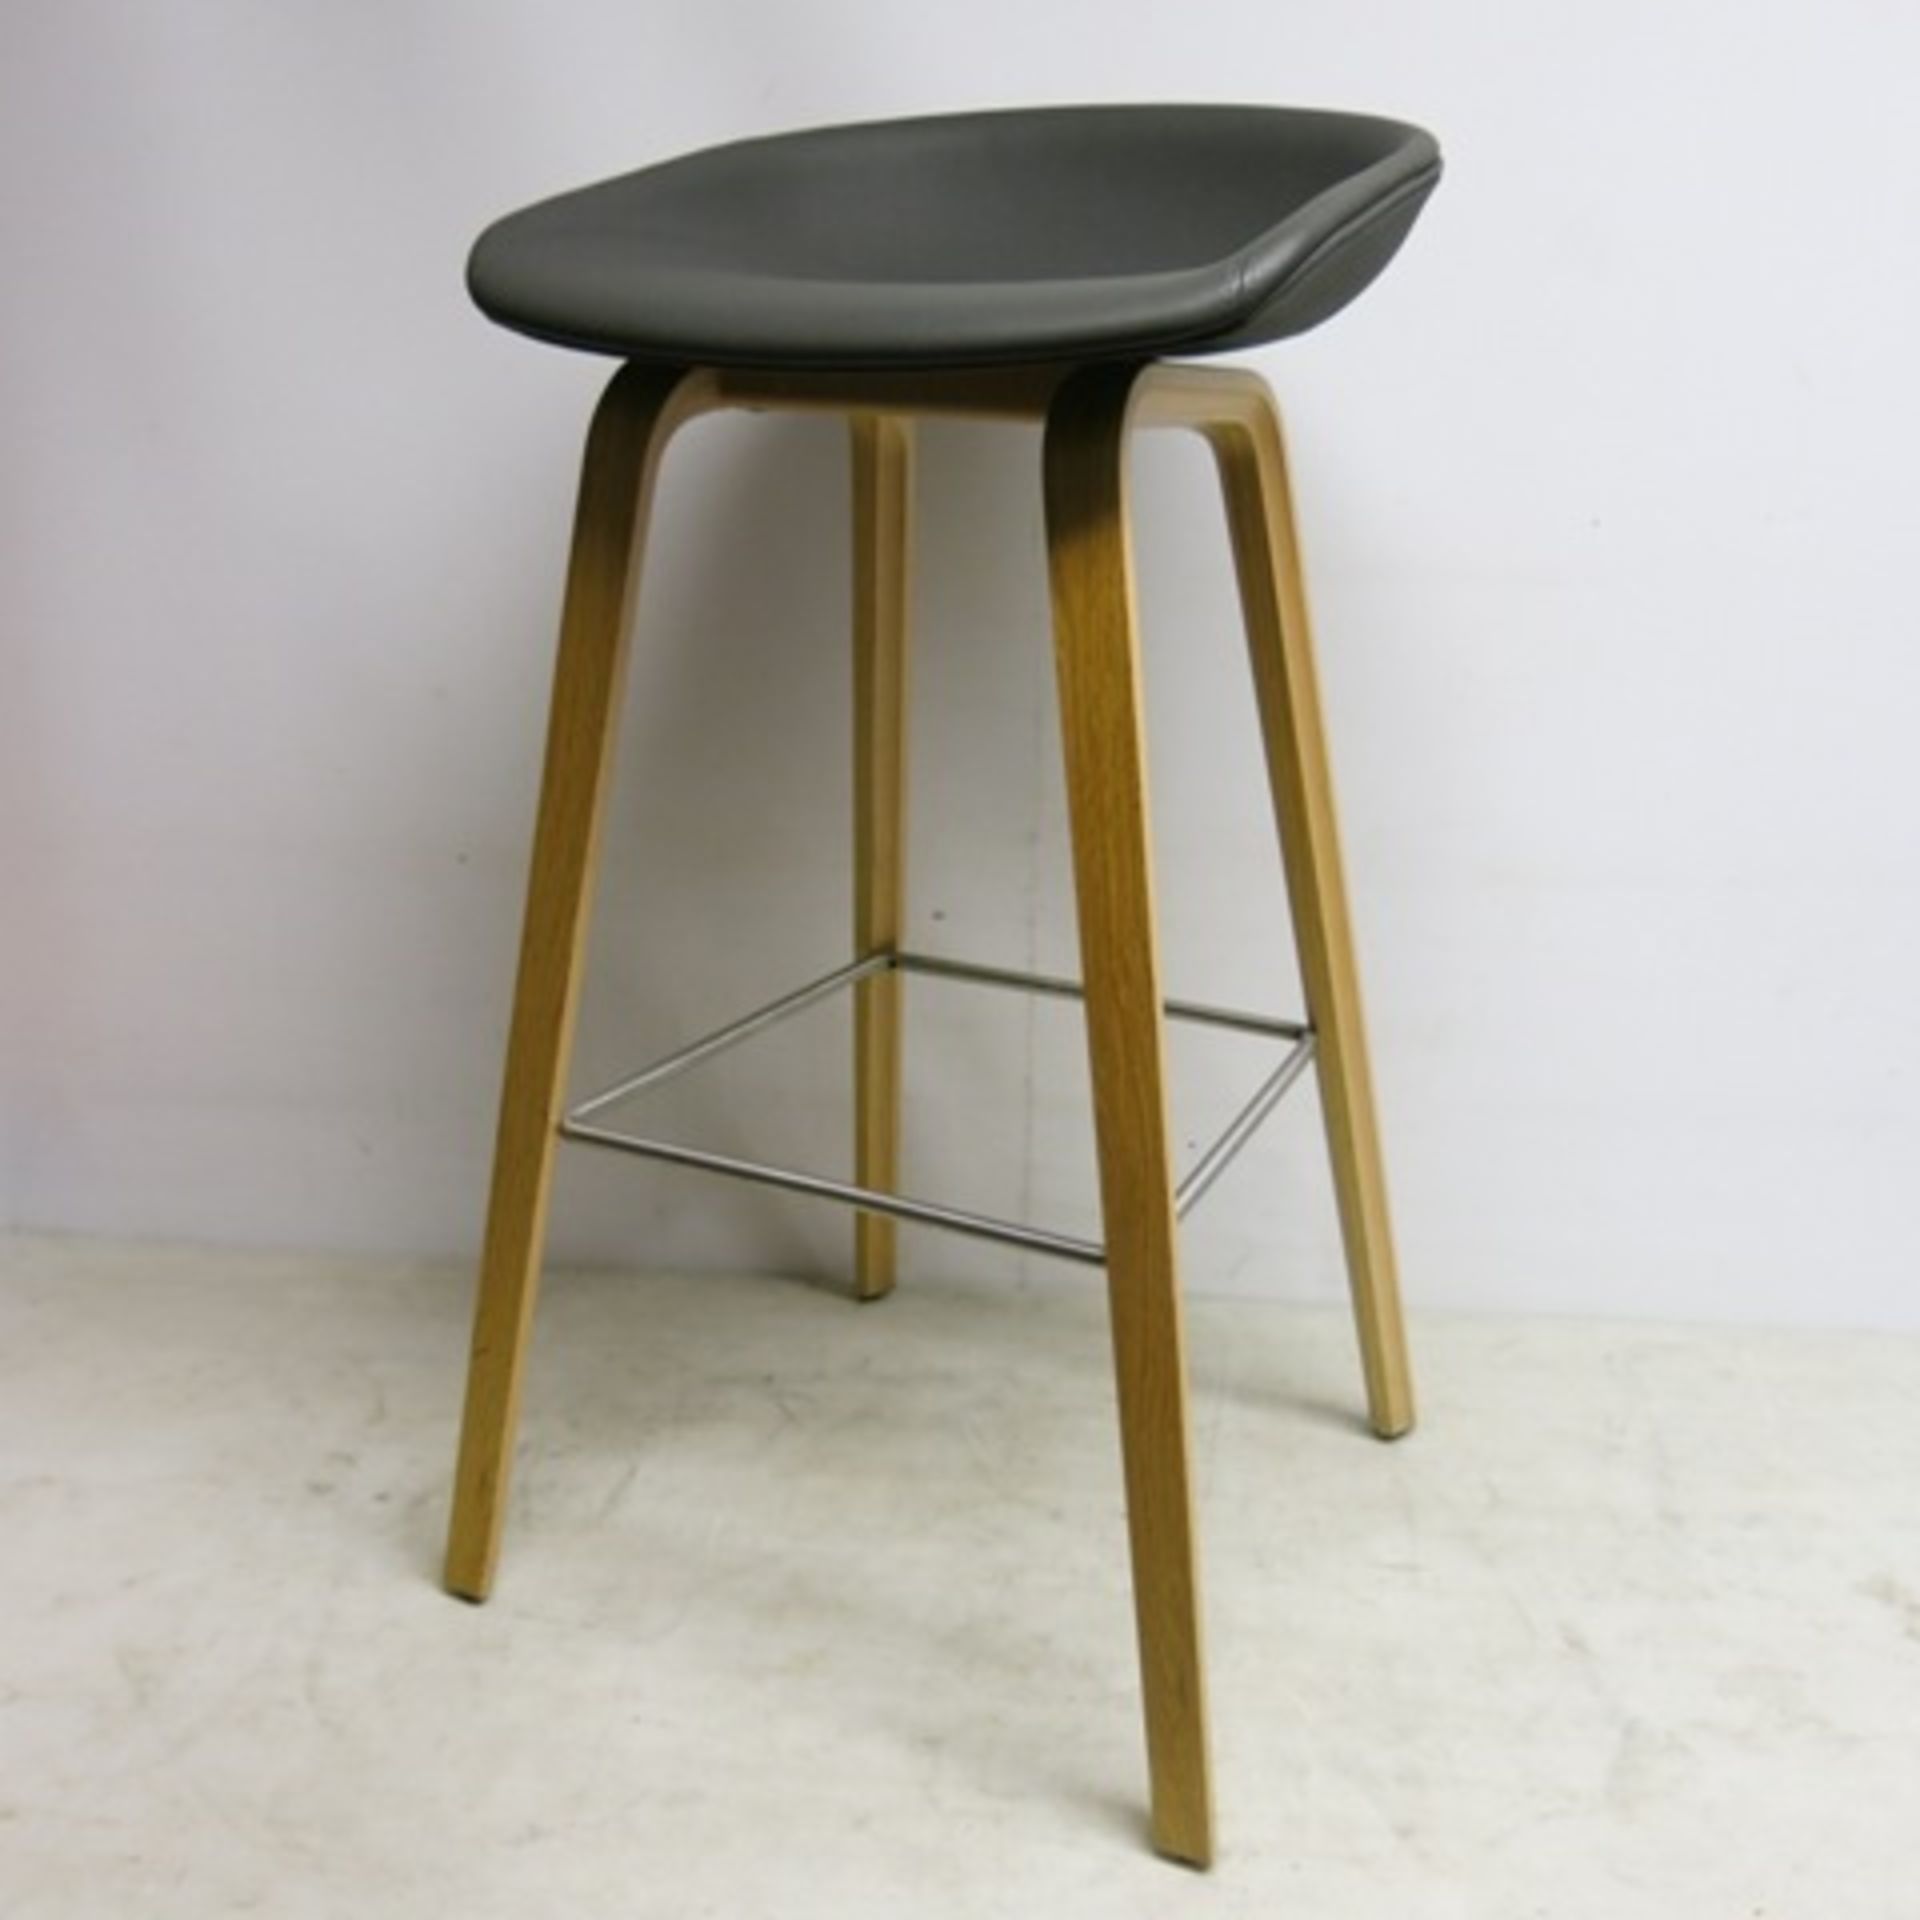 Designer 'Hay' About A Stool Model AAS32 High Stool in Matt Lacquered Oak & Charcoal Grey Padded